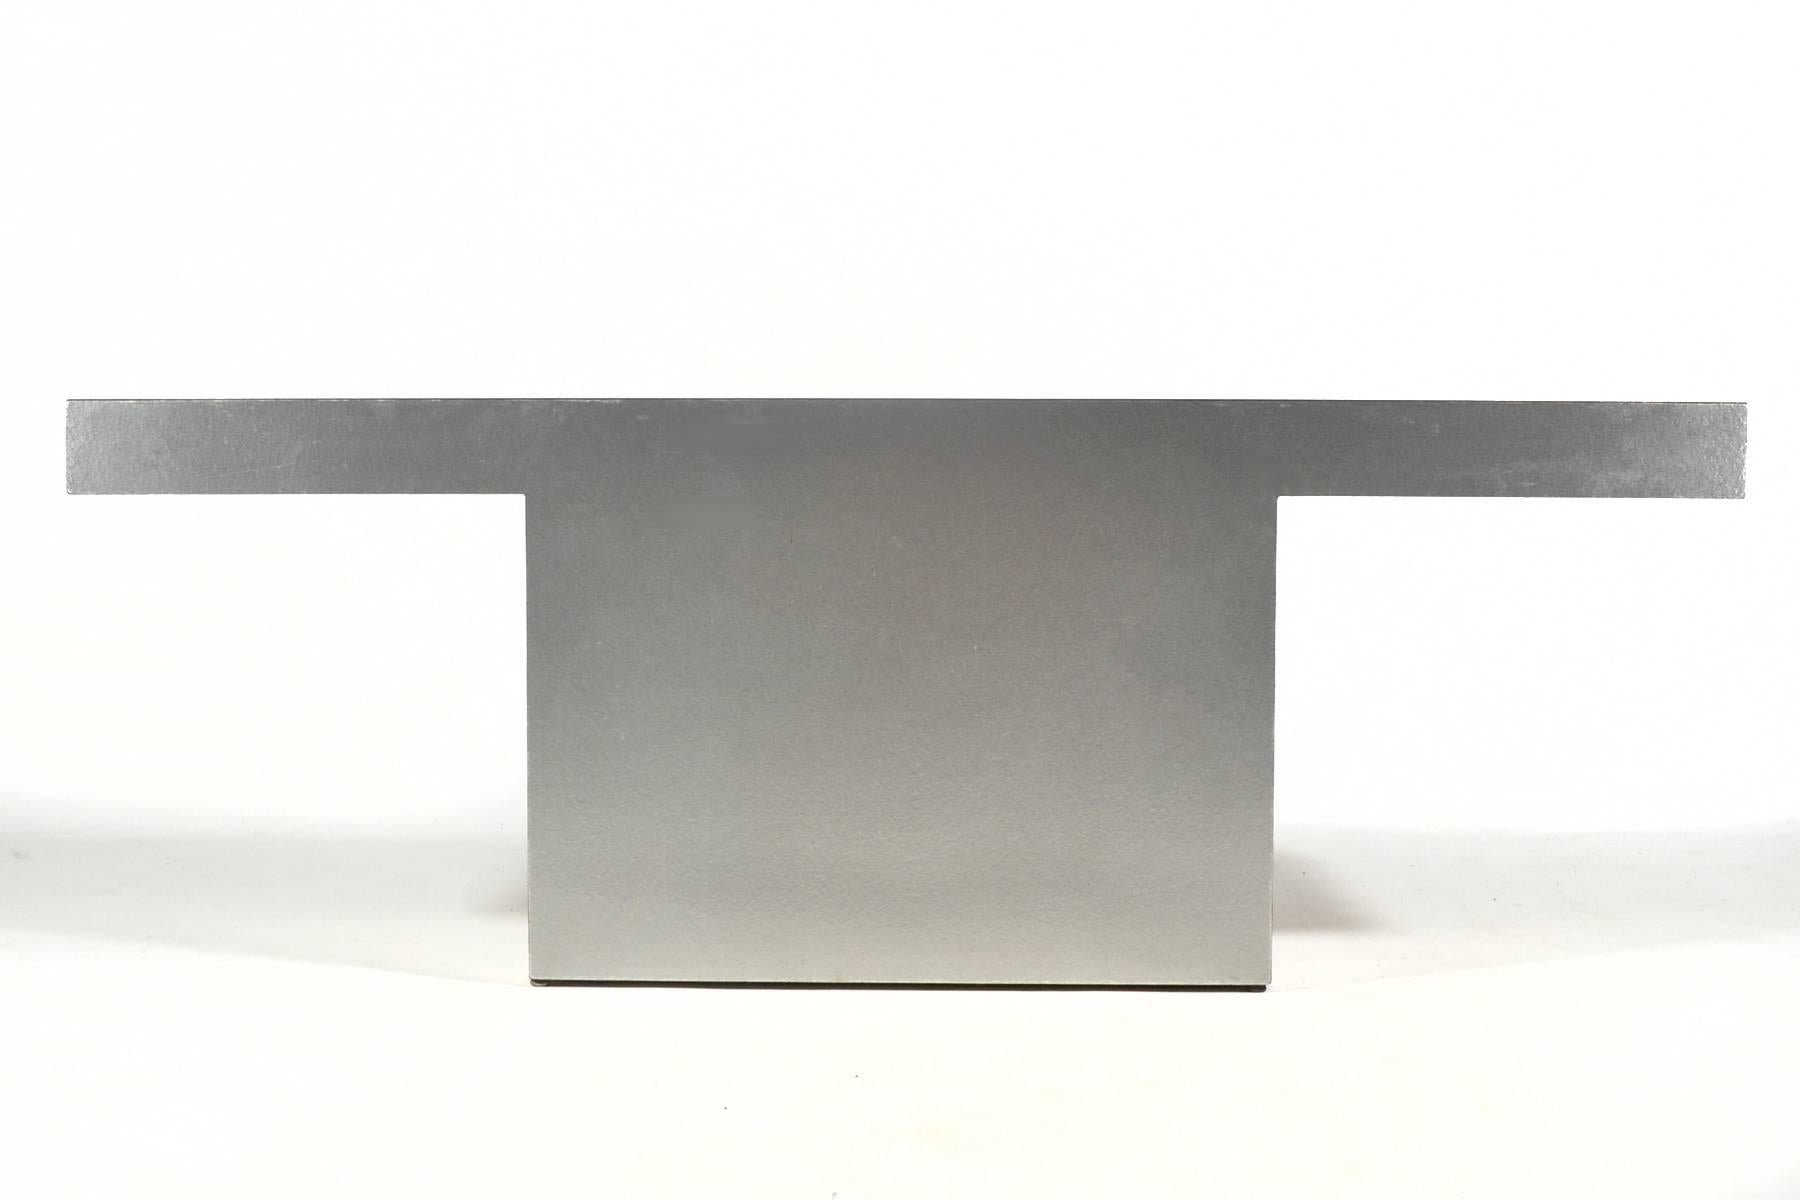 A strong, Minimalist form clad in silver textured mica this table is perfect in an entry or behind a sofa where it can make a powerful statement and be the perfect surface for the display of beautiful objects.